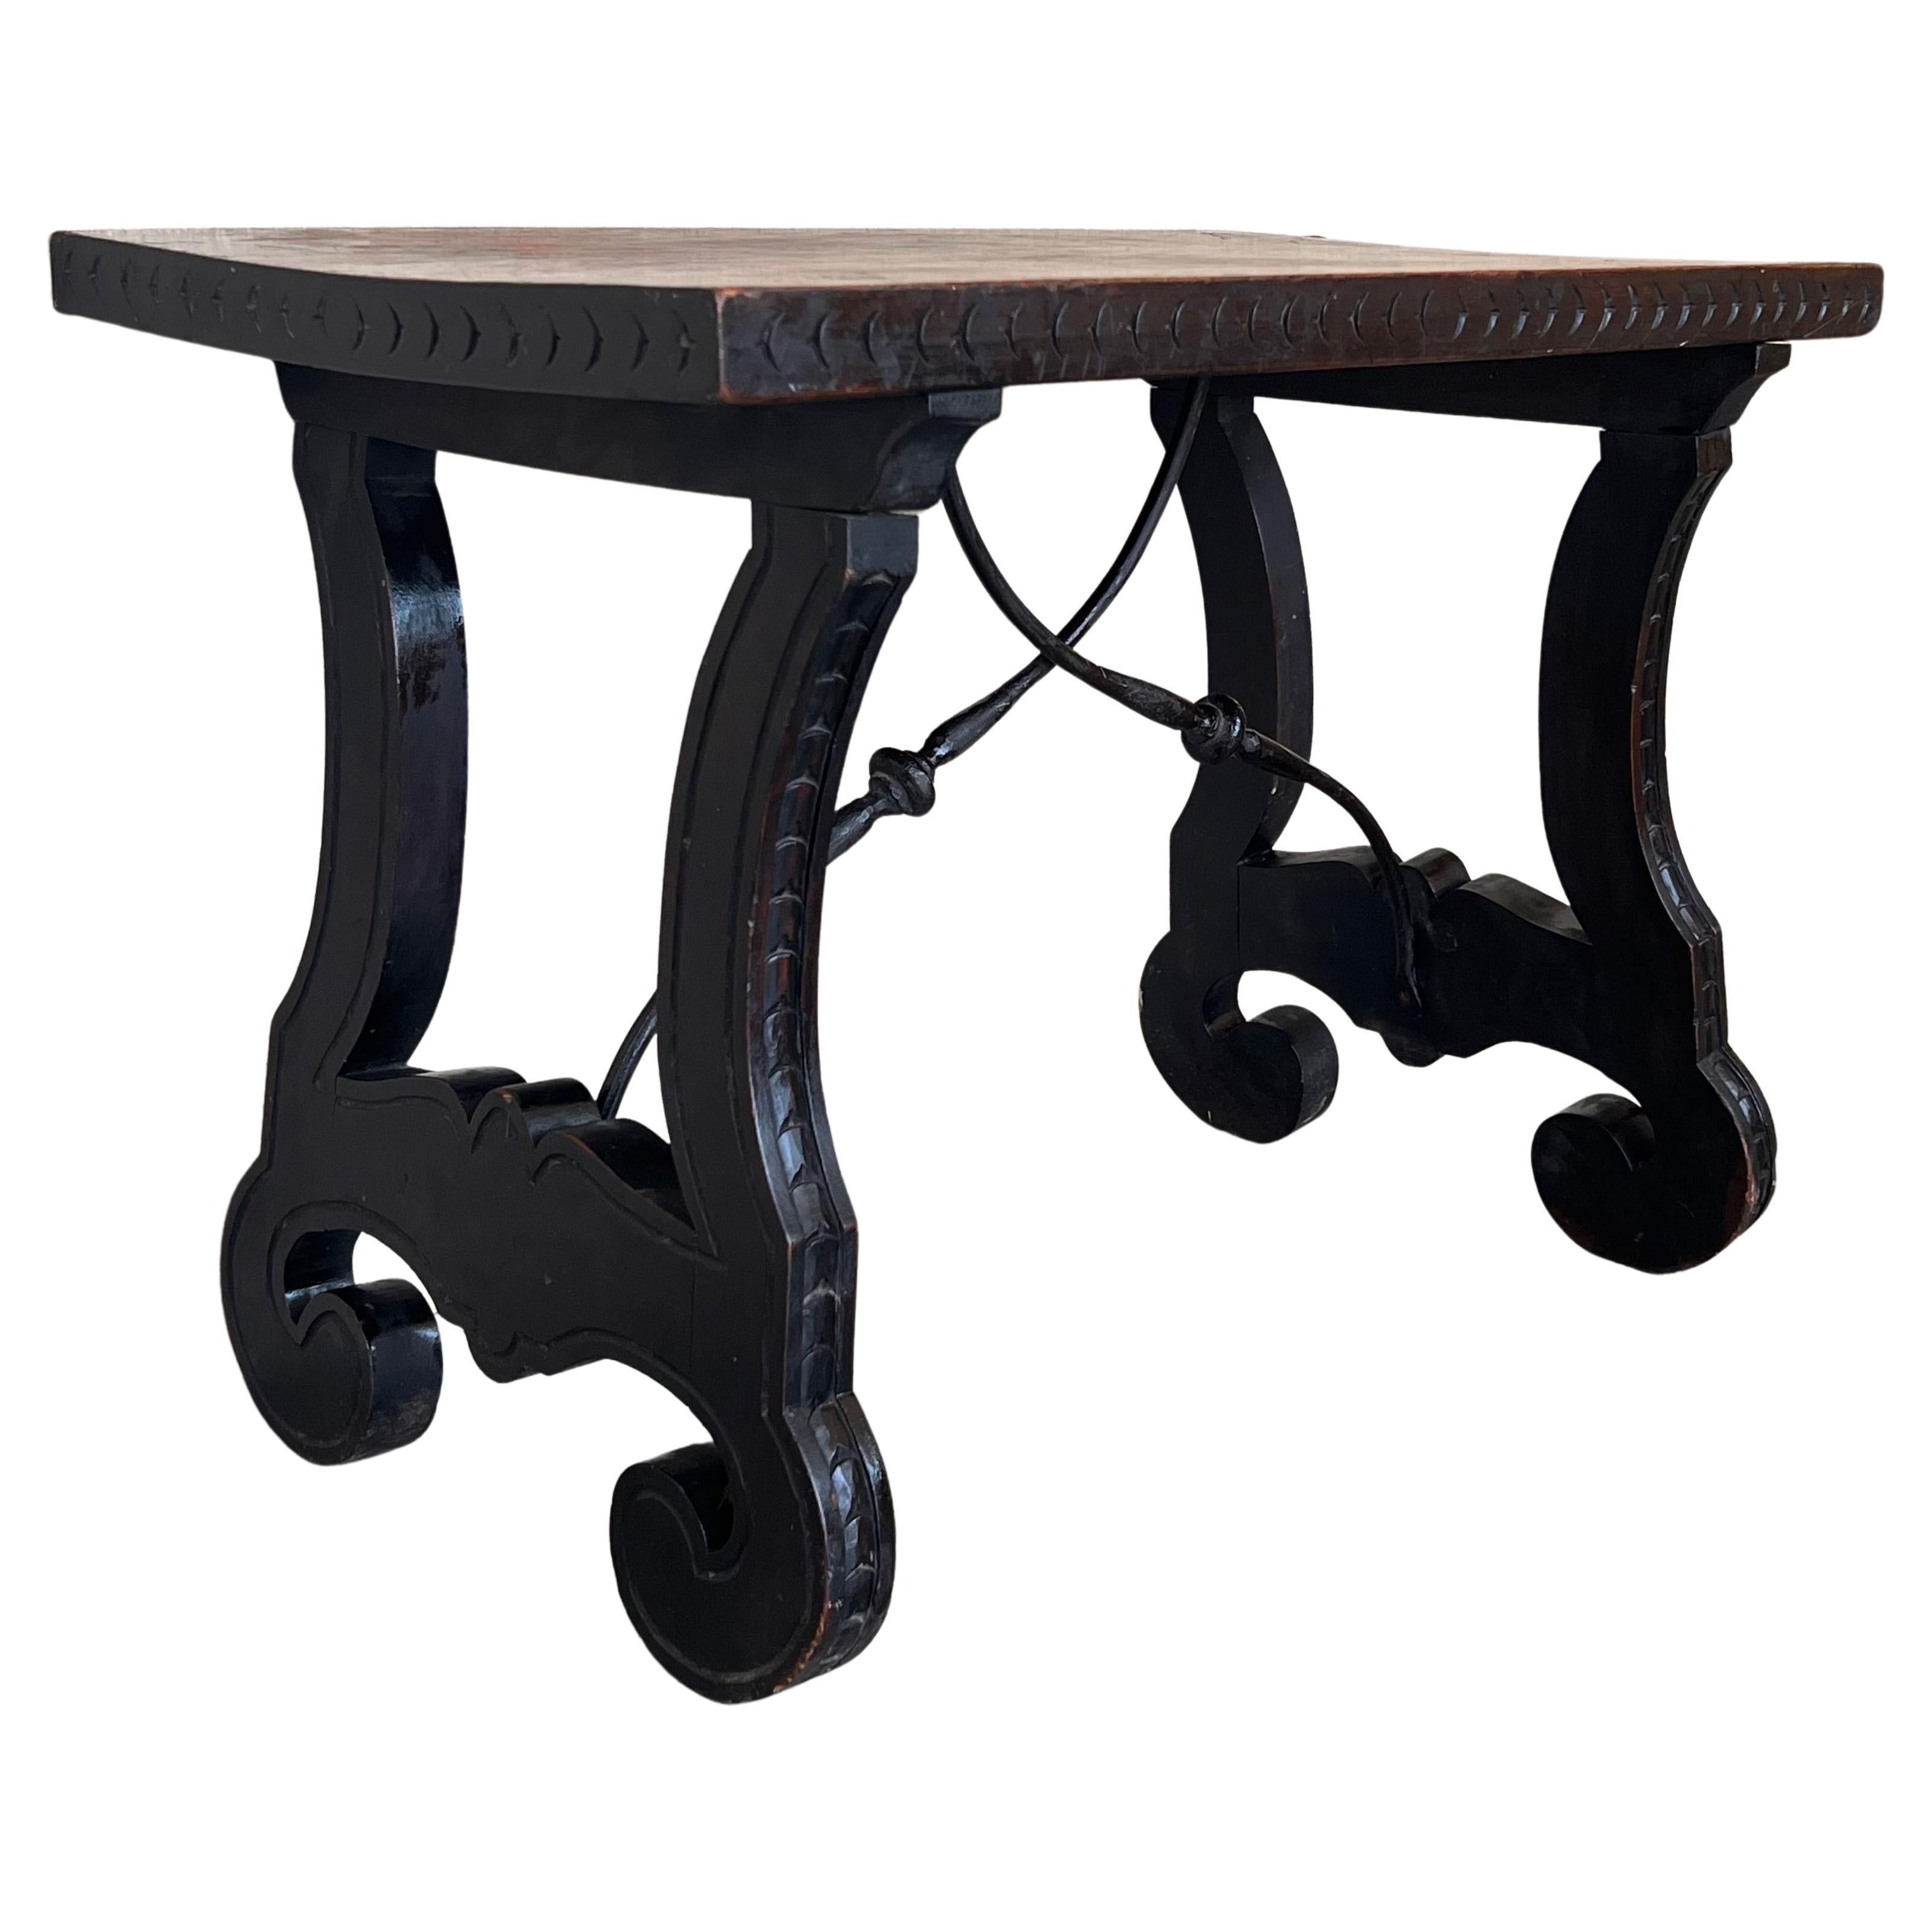 19th Century Ebonized Baroque Spanish Side Table with Lyre Legs For Sale